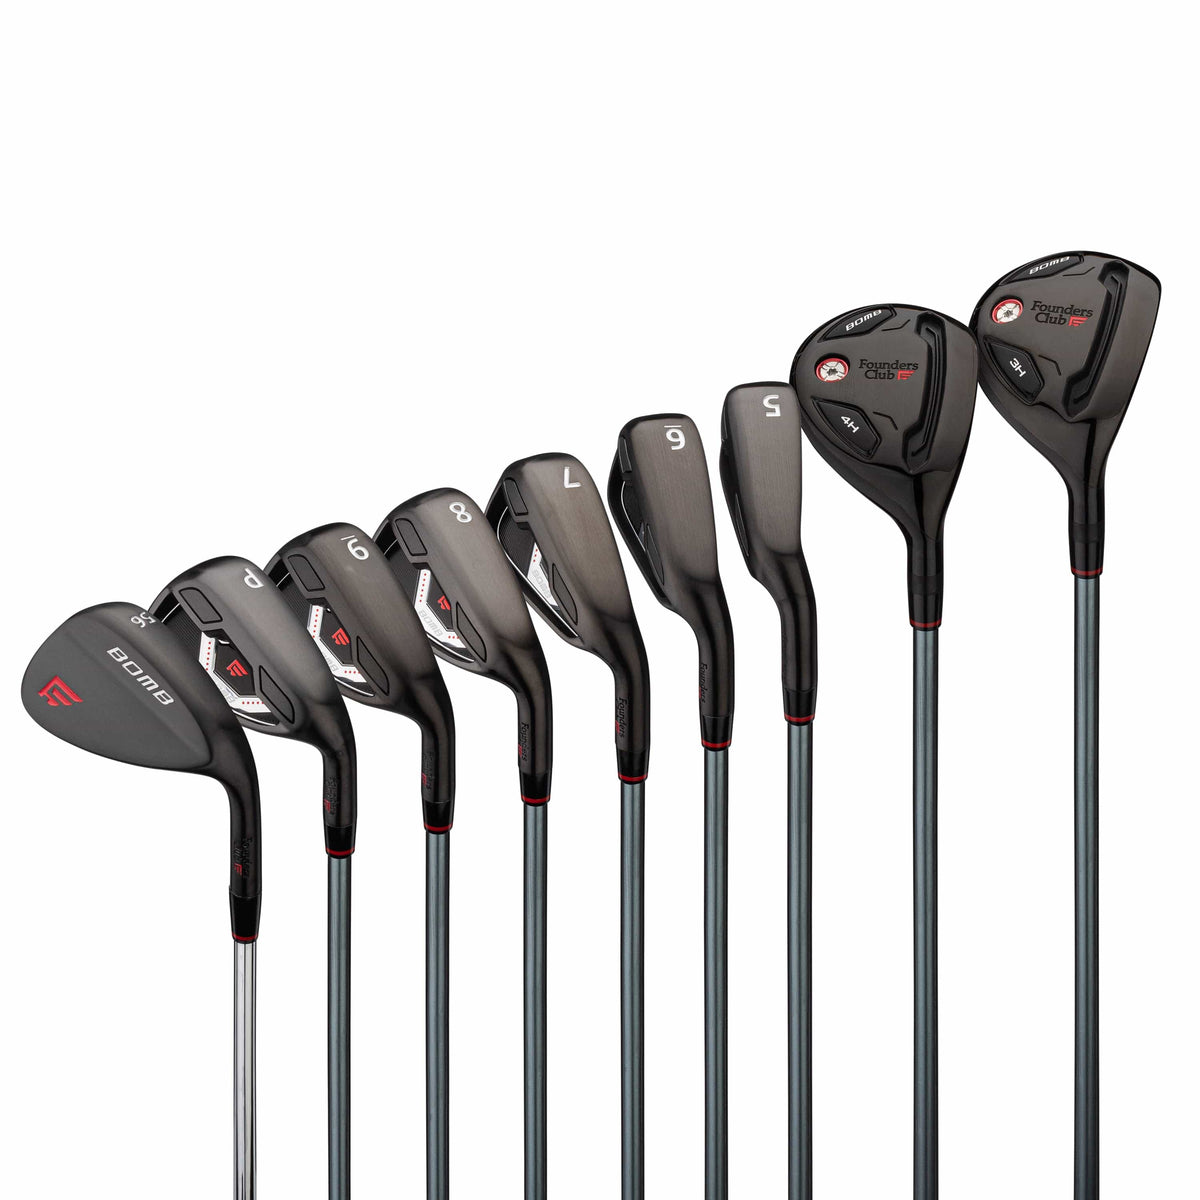 Founders Club Bomb Combo Irons Graphite Golf Set 3-PW Plus Free Sand Wedge